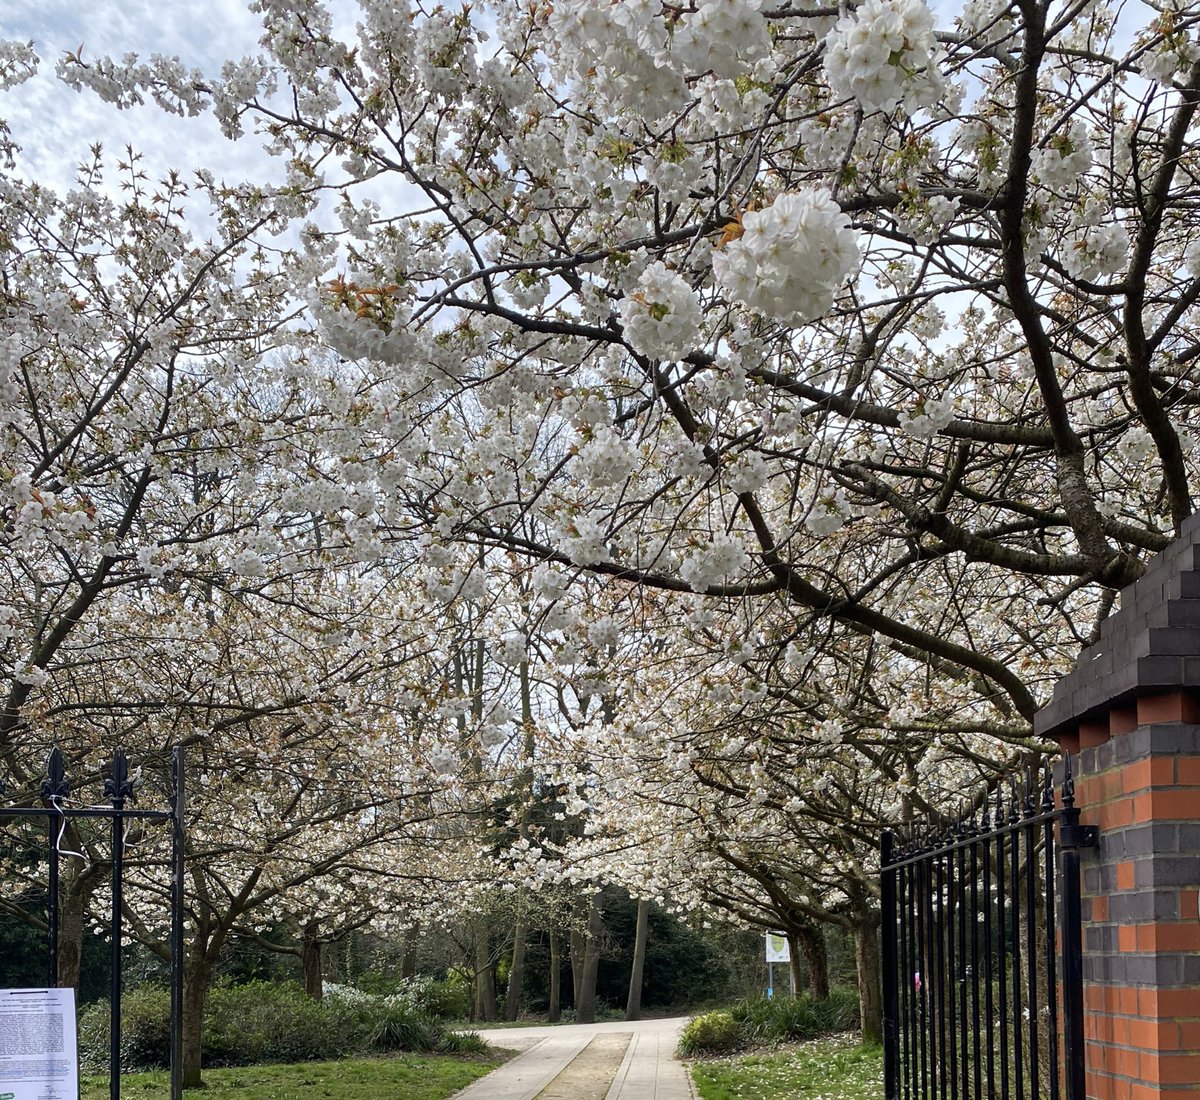 It’s well under way. It’s that time of year for glorious blossom walkway 🌸 at Fisherman’s Gate at CP Park 🌸 #CrystalPalacePark #Sydenham